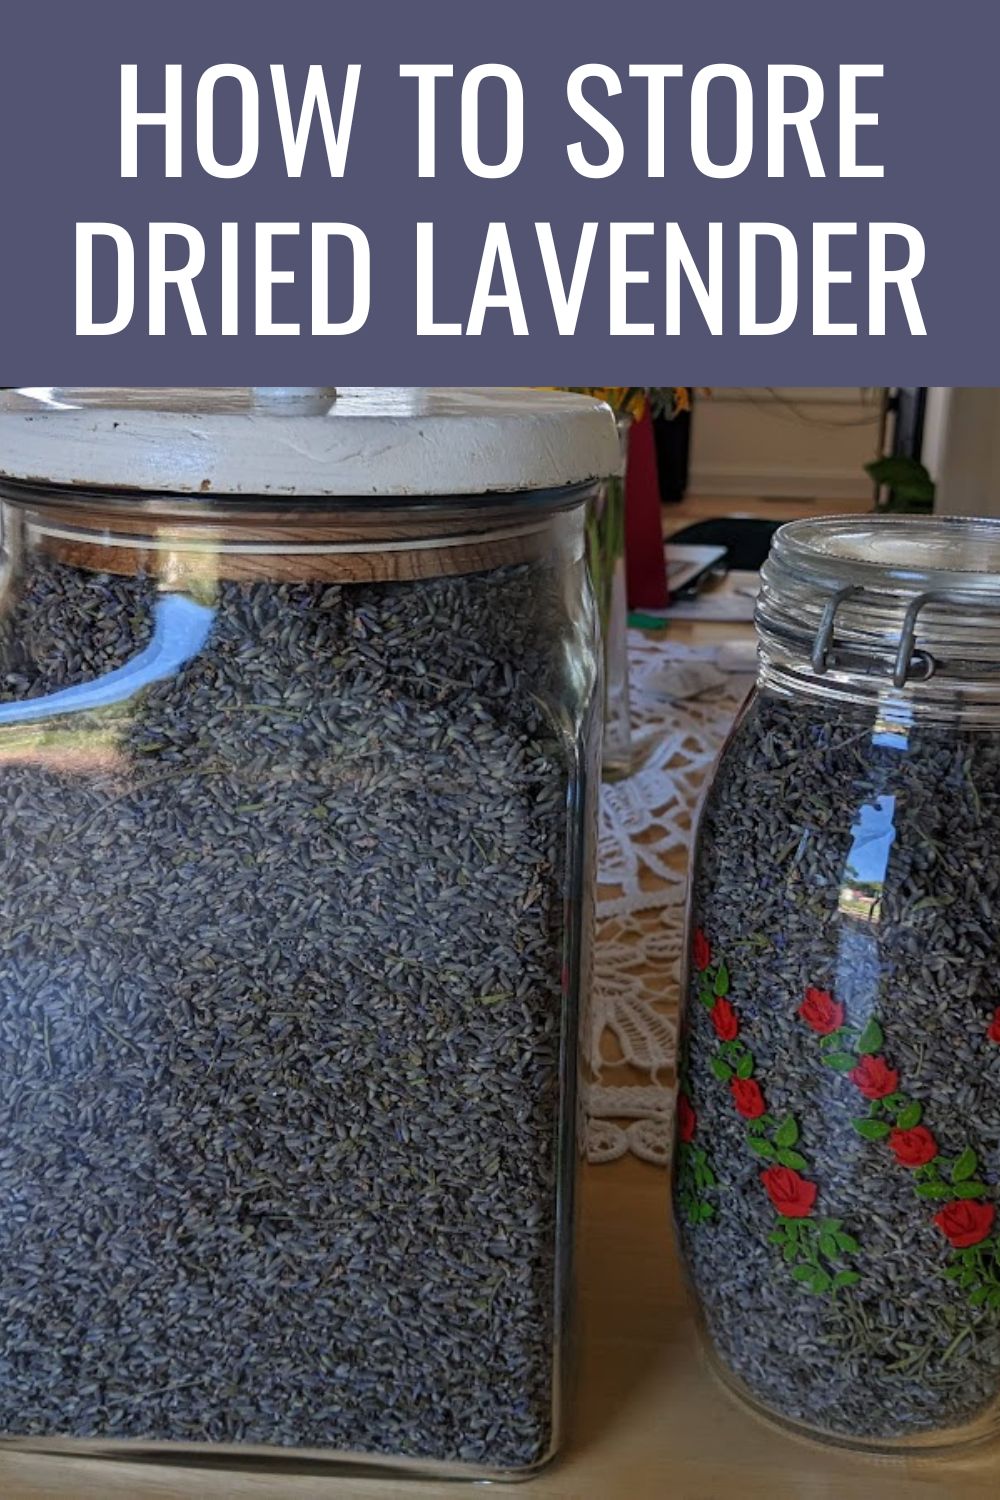 How to store dried lavender.